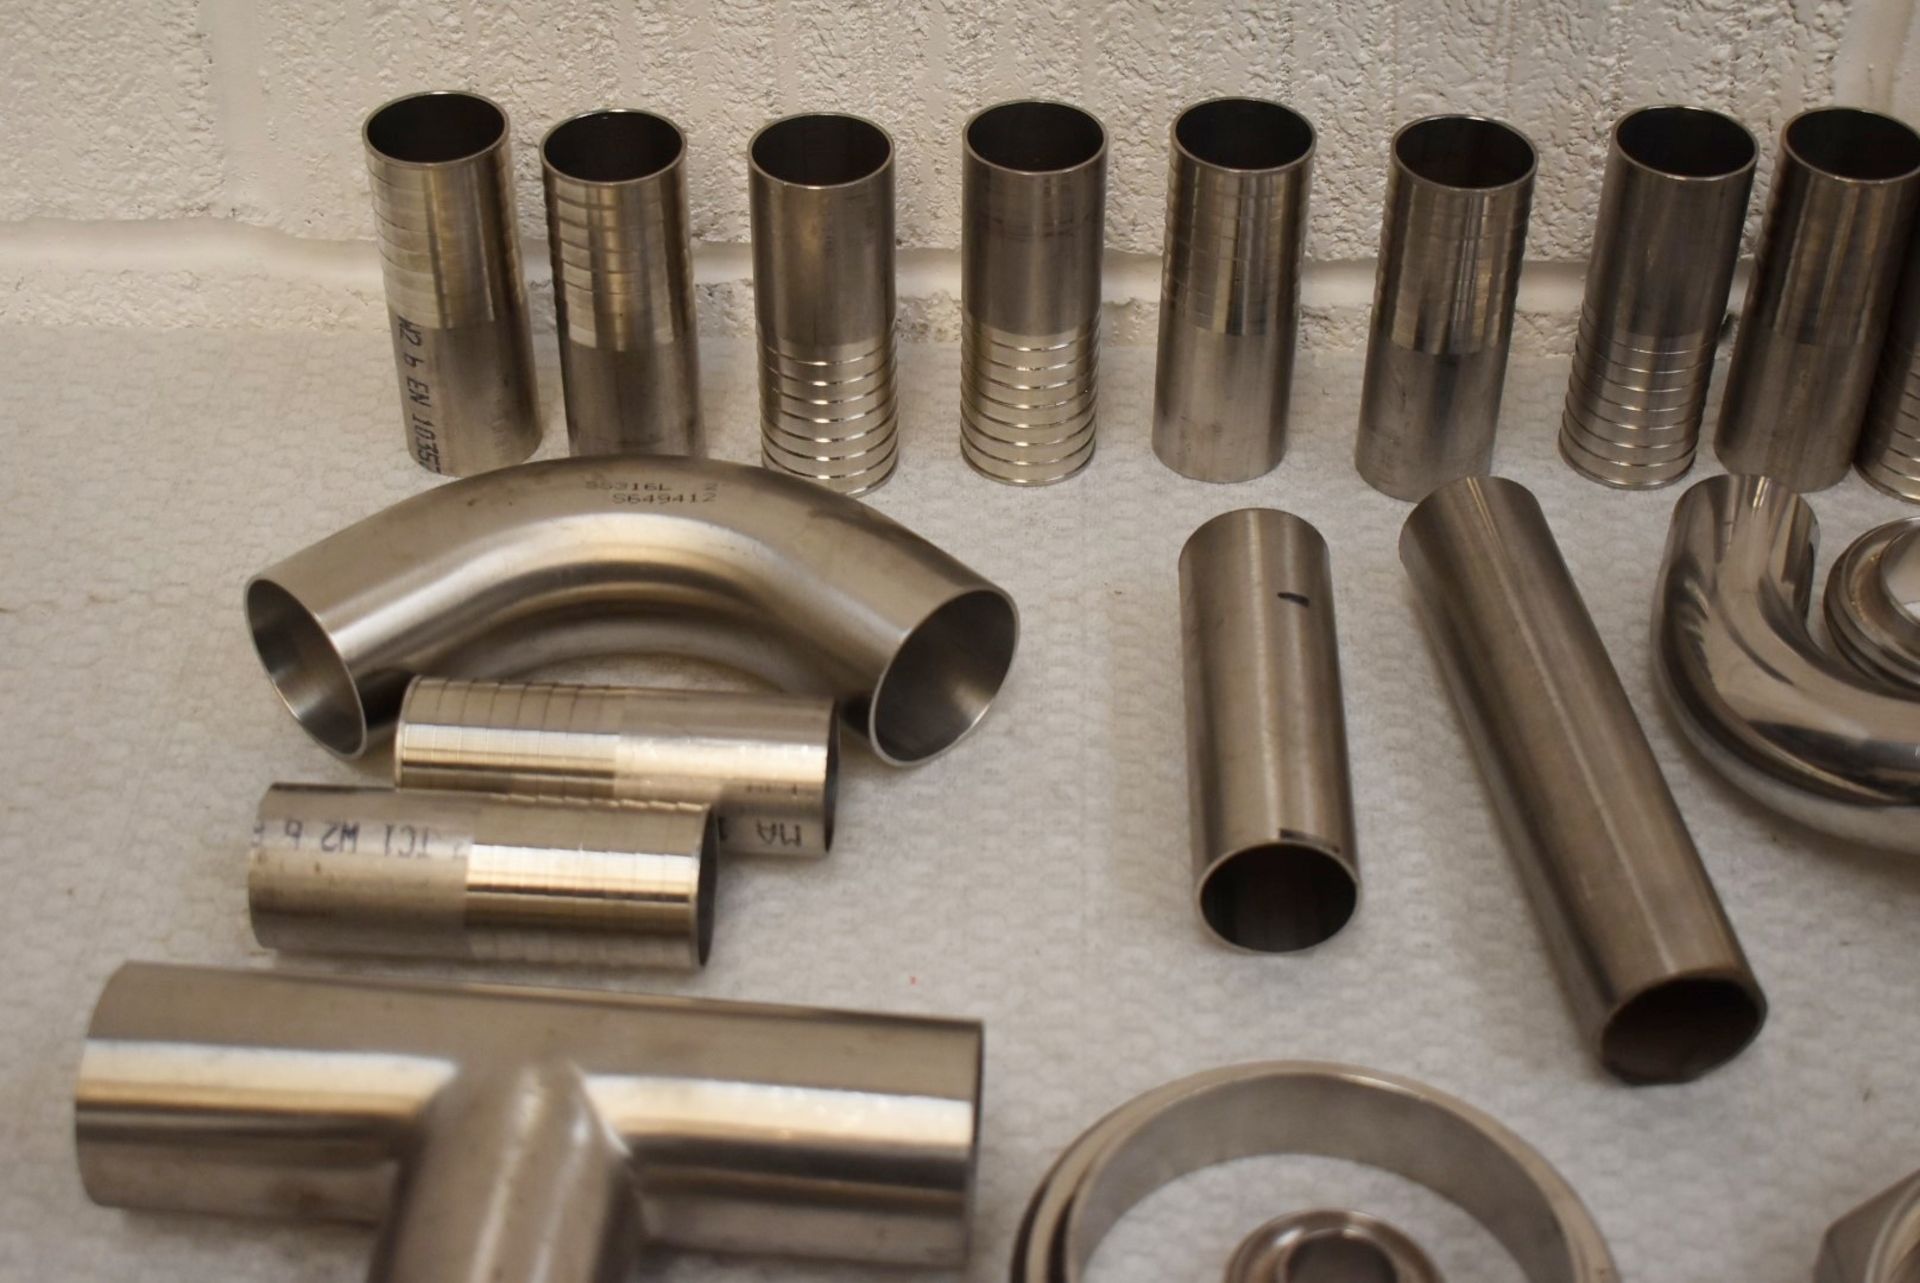 Assorted Job Lot of Stainless Steel Fittings For Brewery Equipment - Includes Approx 67 Pieces - - Image 3 of 16